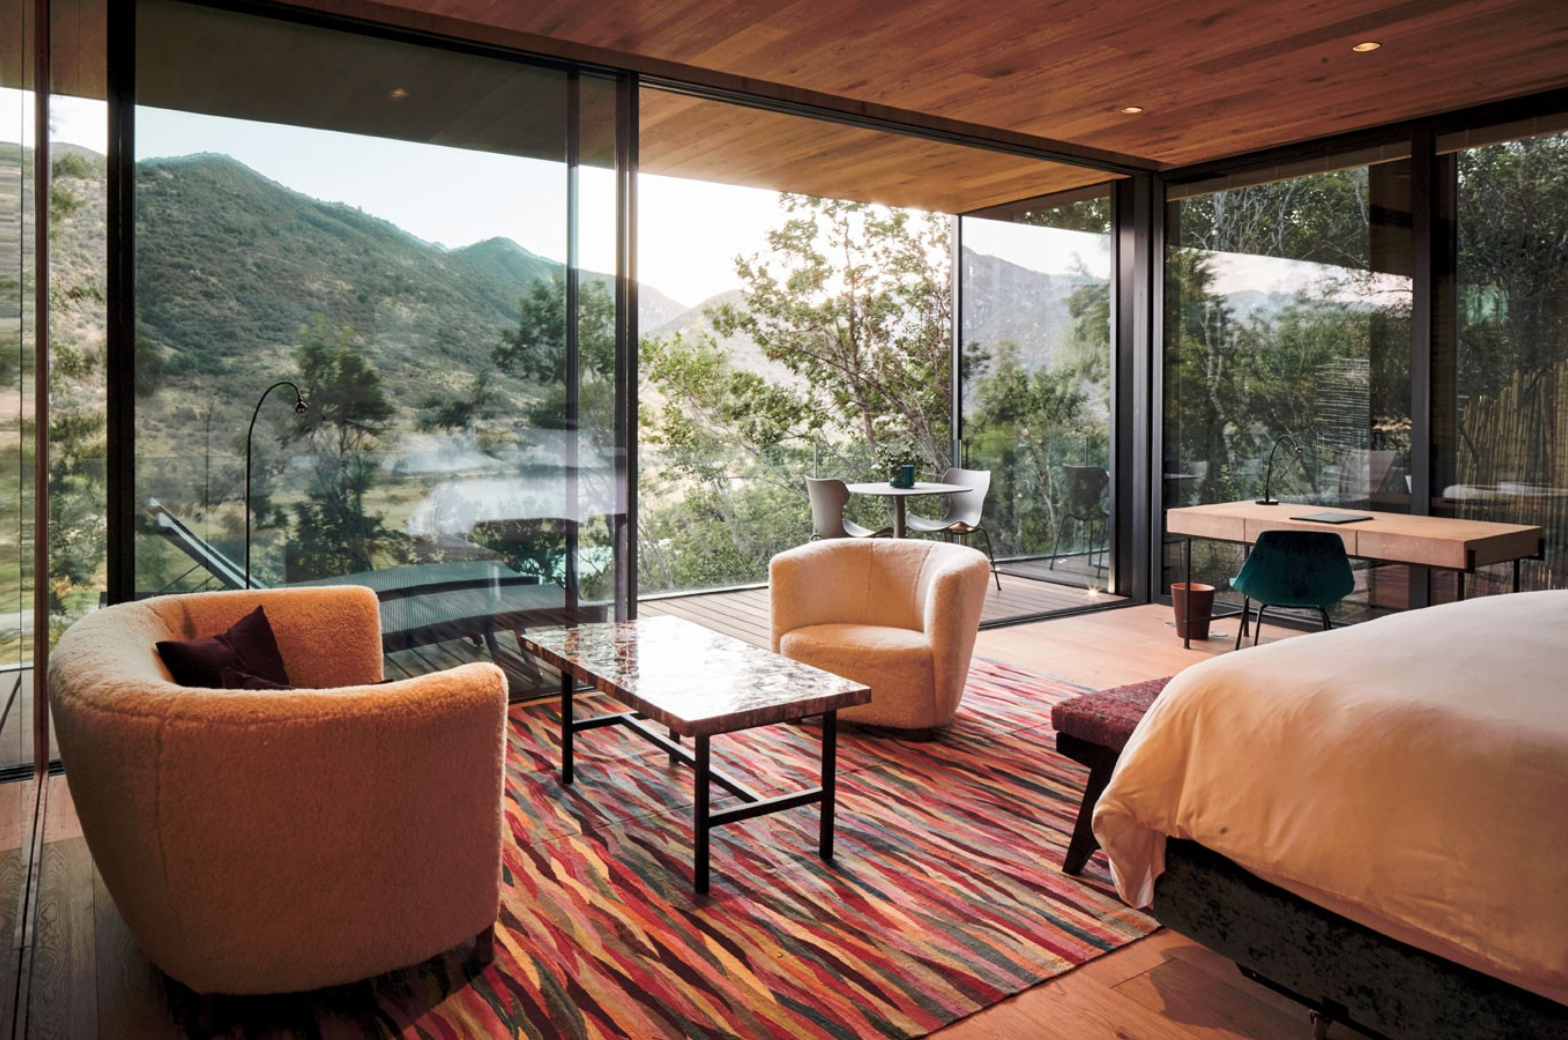 Antiquity Suite at Puro Vik Retreat in Chile - Glass-walled houses on cliffs overlooking the Millahue Valley